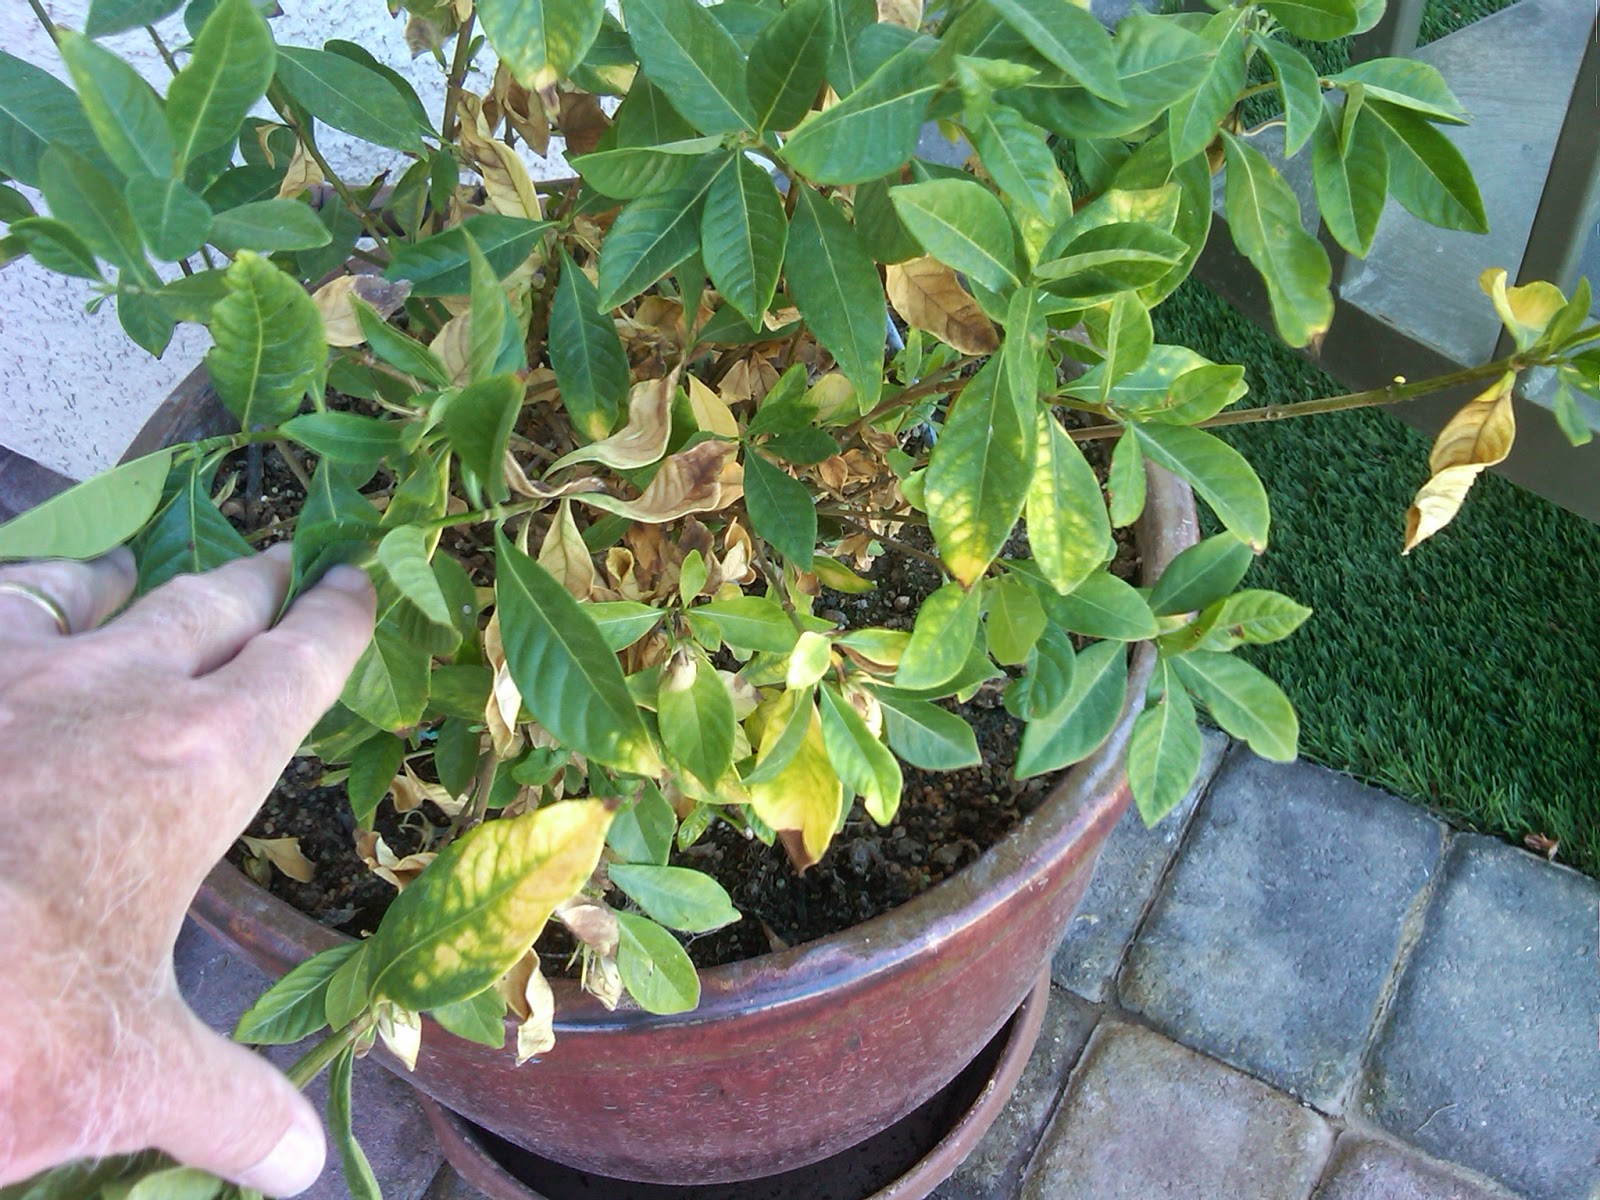 What does it mean if you have yellowing leaves on your outdoor plants?